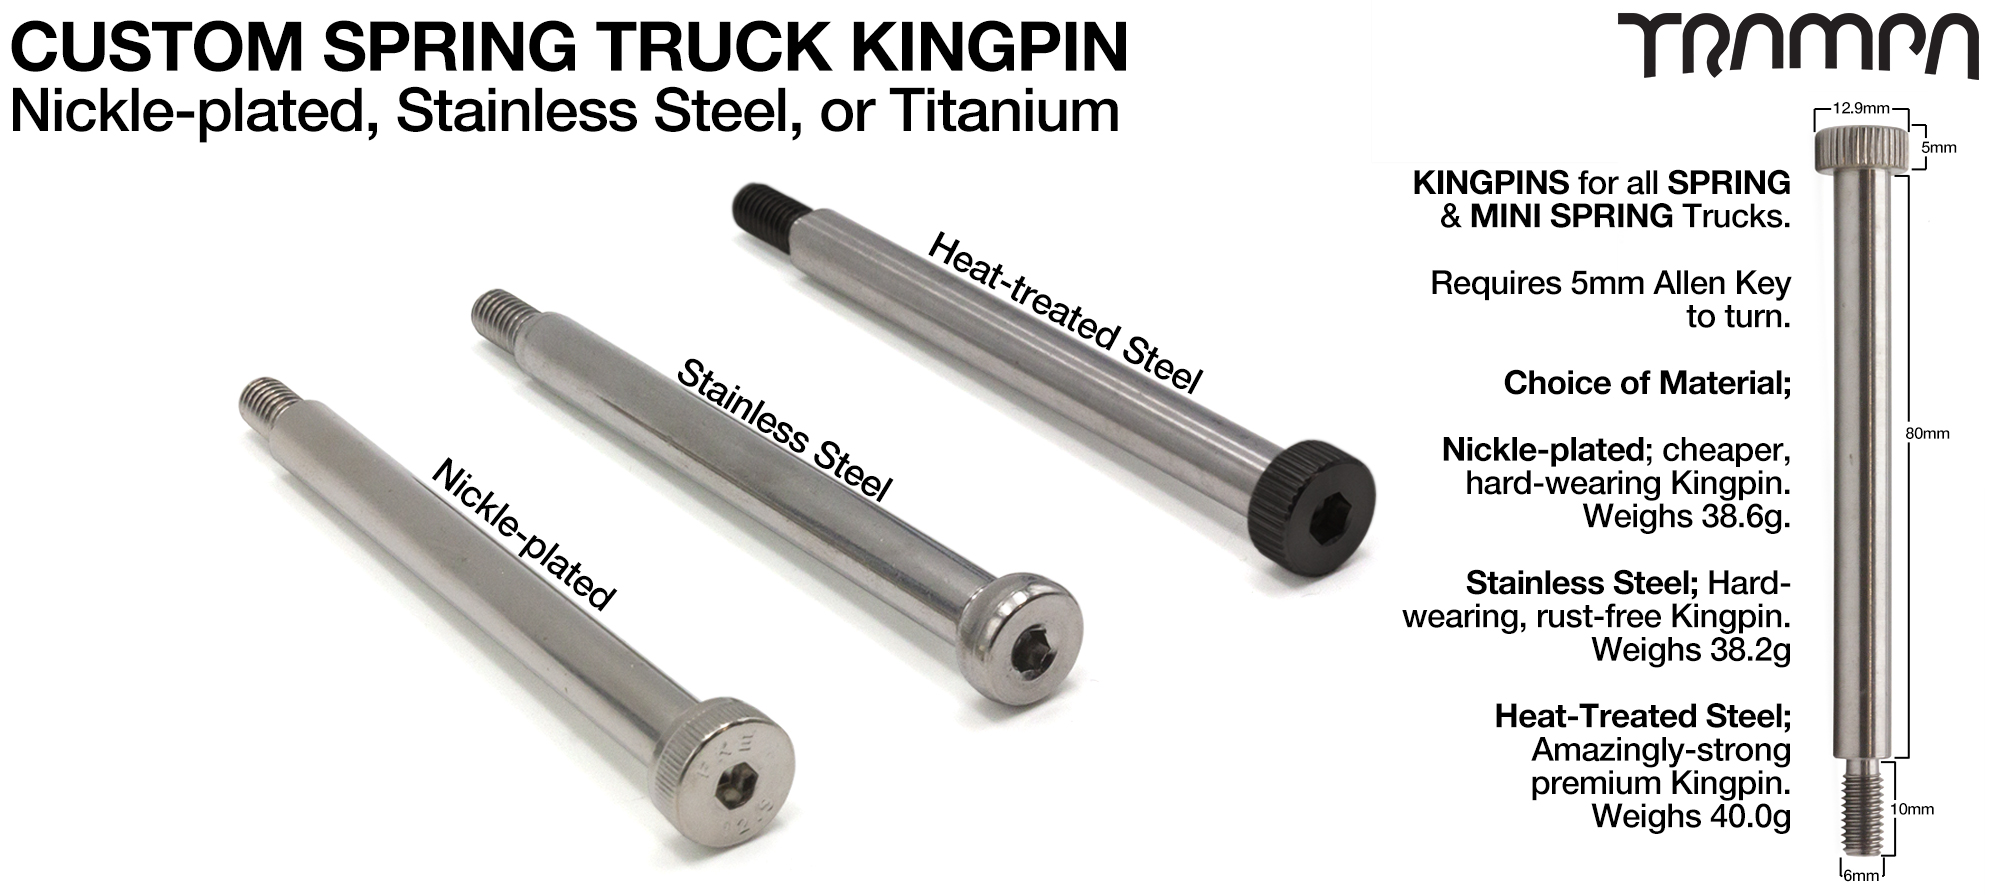 Custom Kingpin for Spring Trucks - M8x80mm Nikle Plated, Stainless Steel or TITANIUM